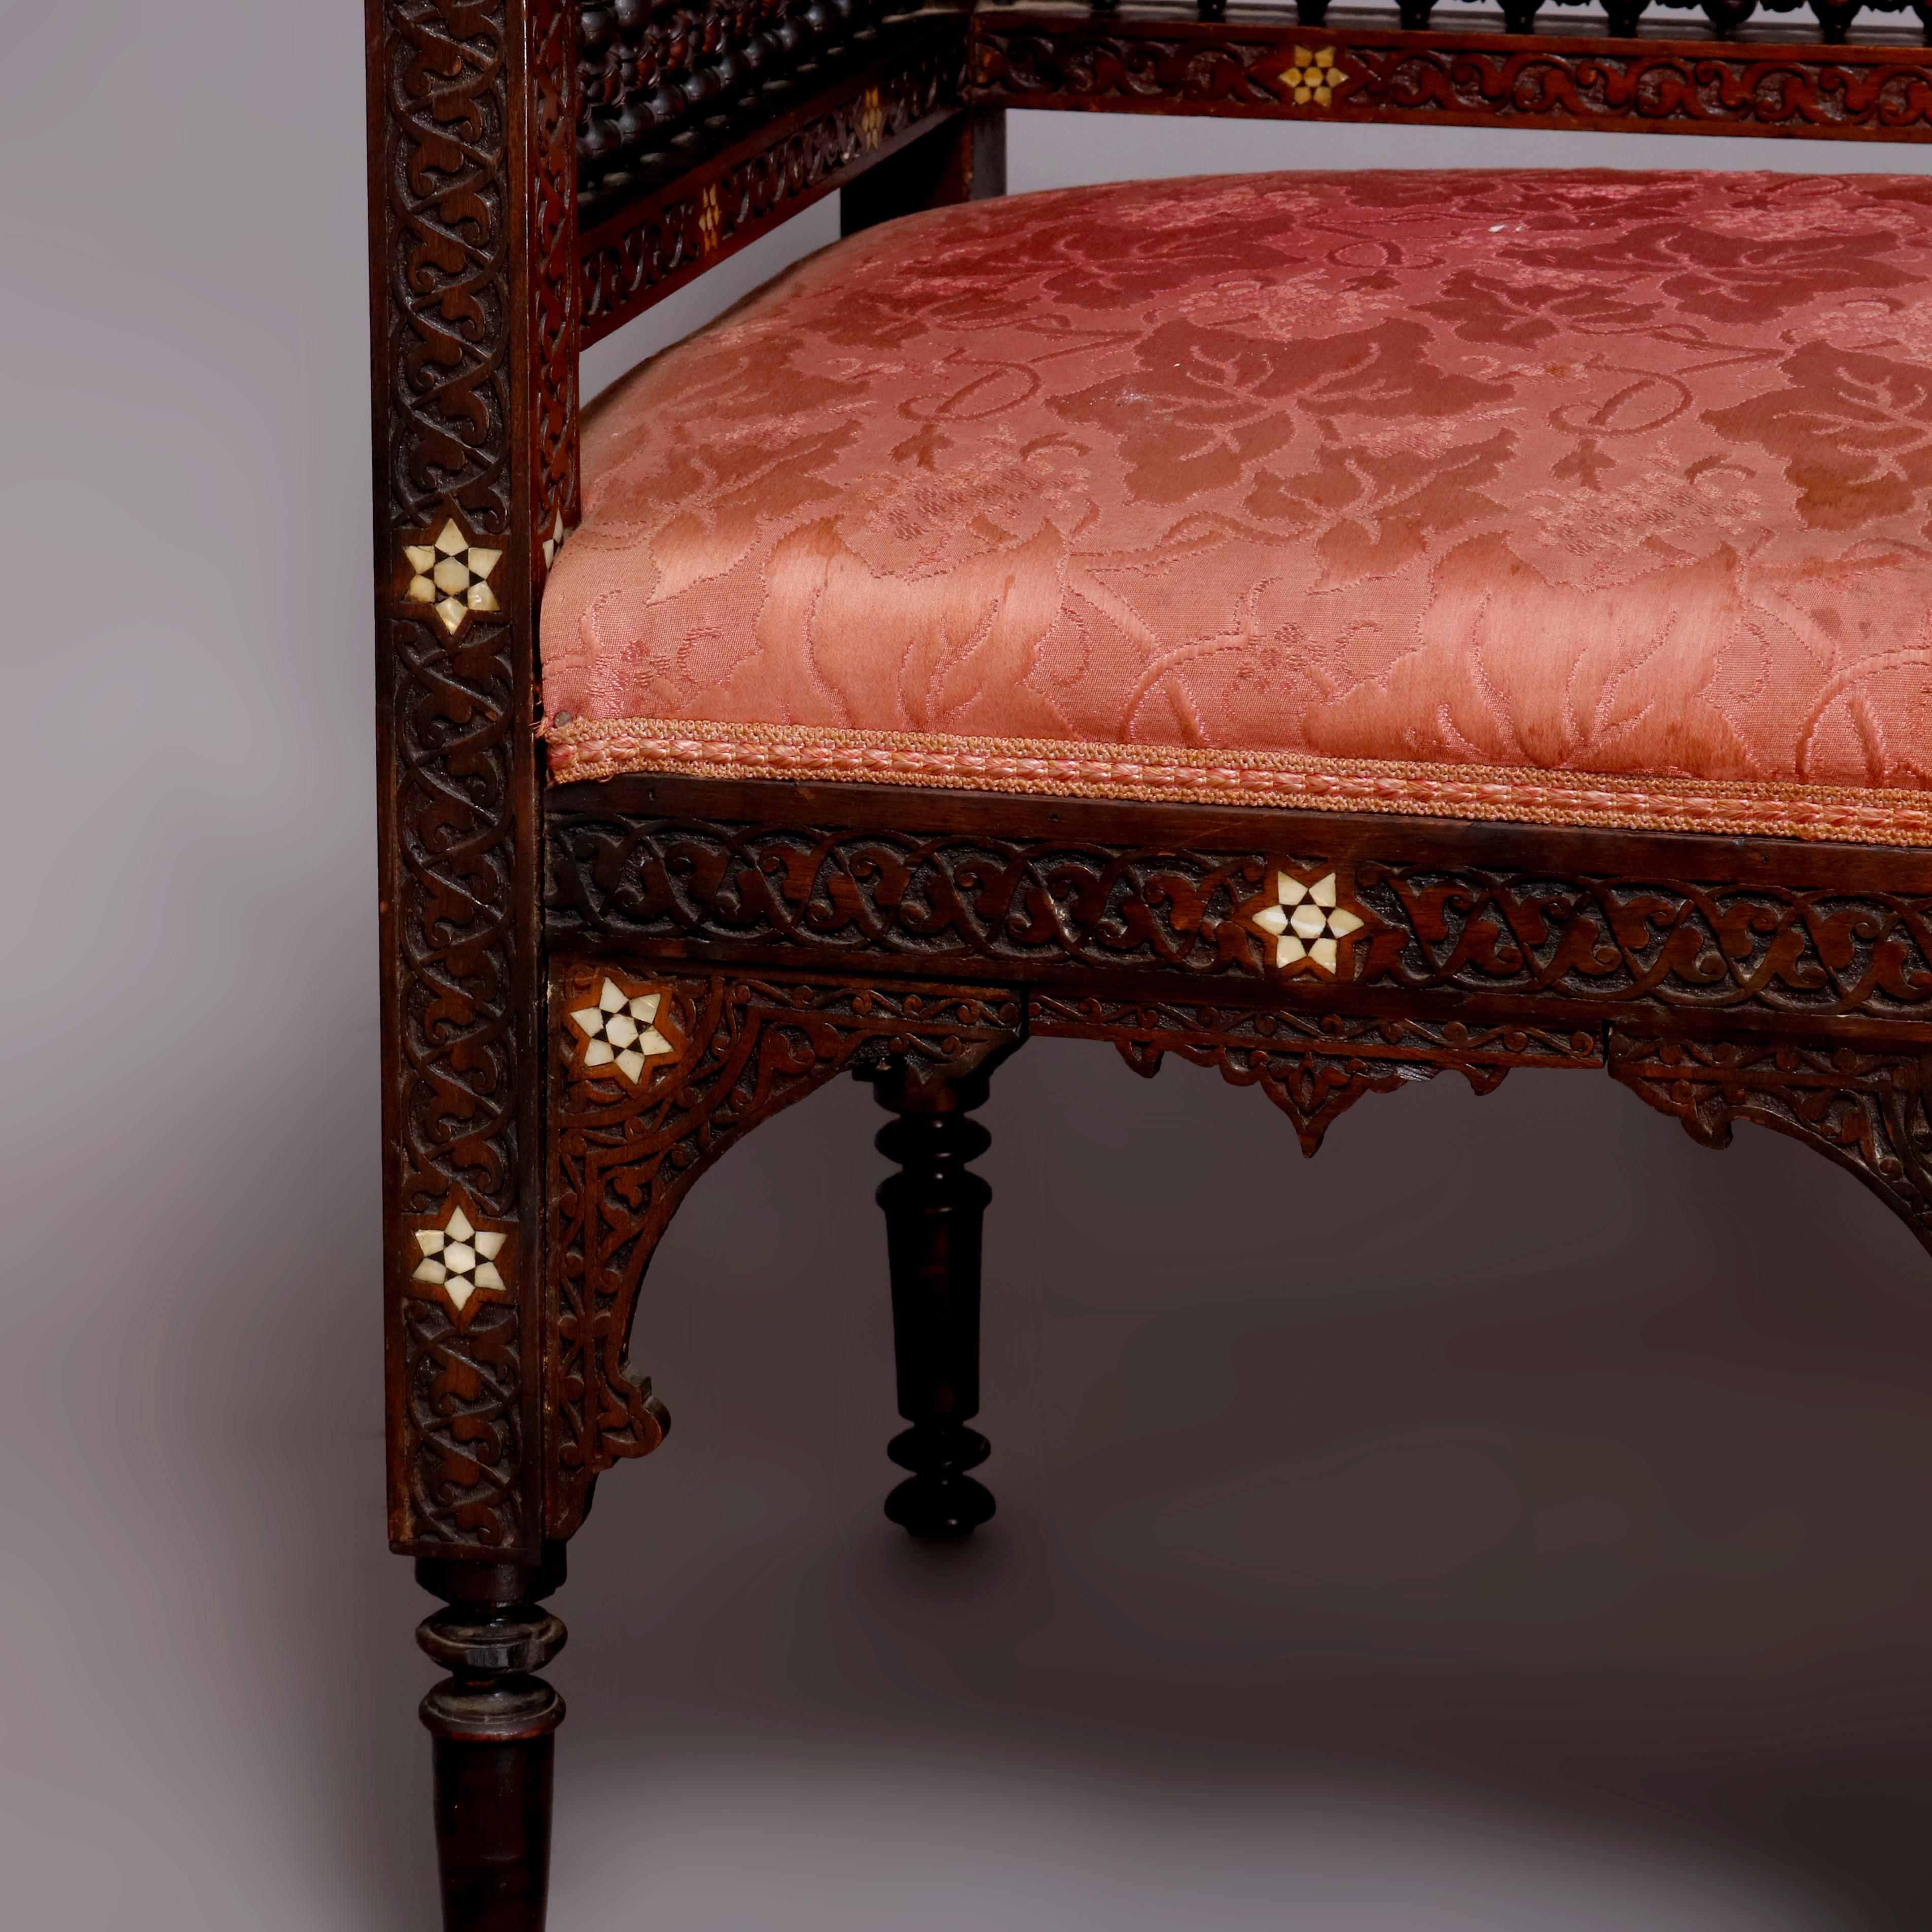 Syrian Orientalist Mother of Pearl Inlaid & Carved Hardwood Settee 19th Century 6